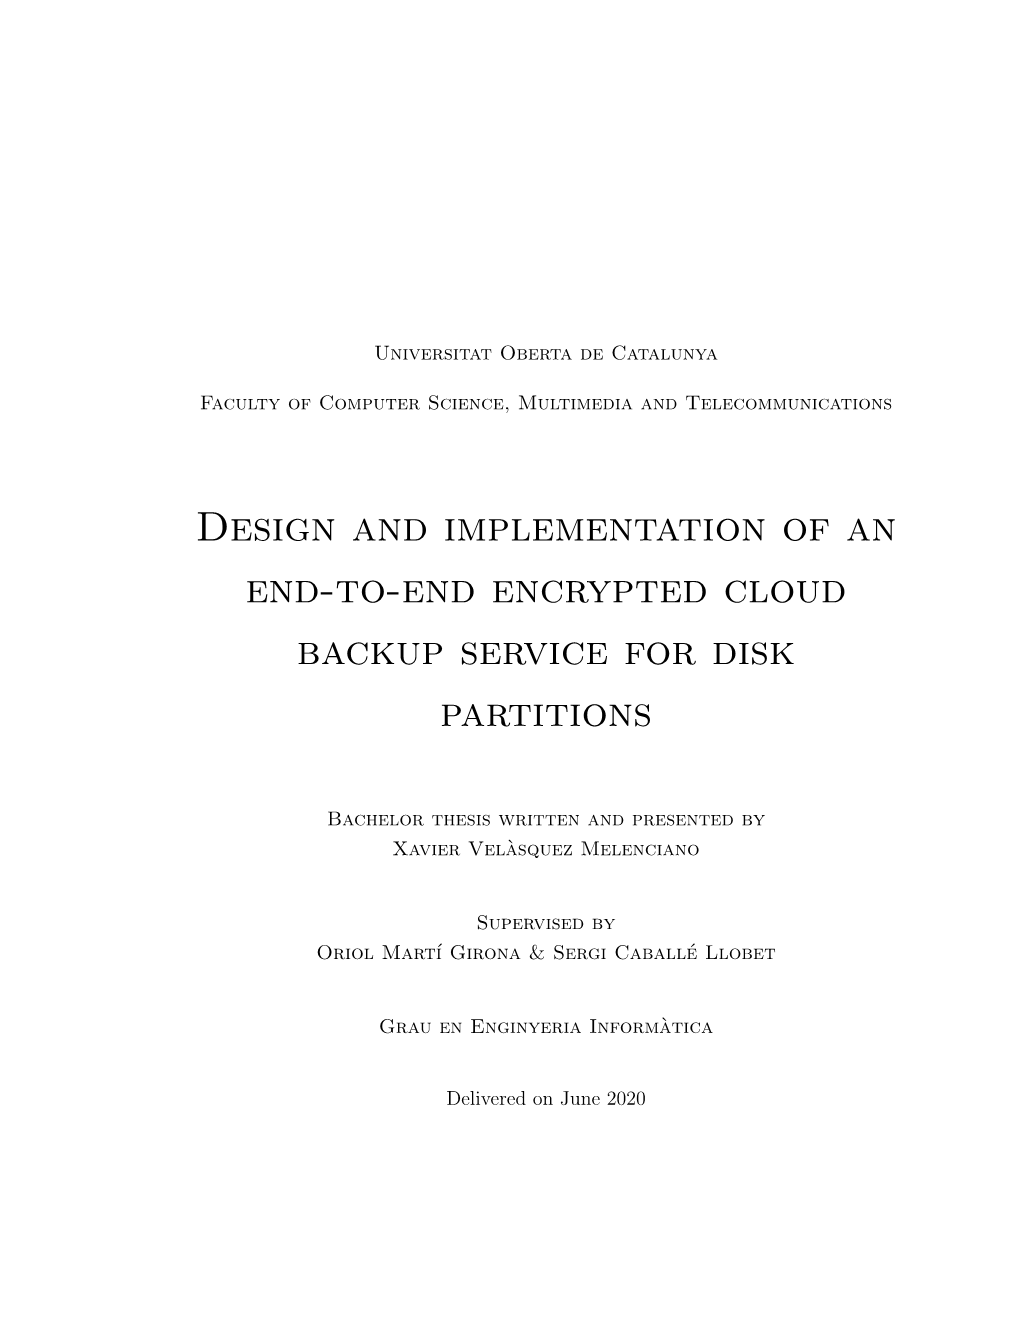 Design and Implementation of an End-To-End Encrypted Cloud Backup Service for Disk Partitions